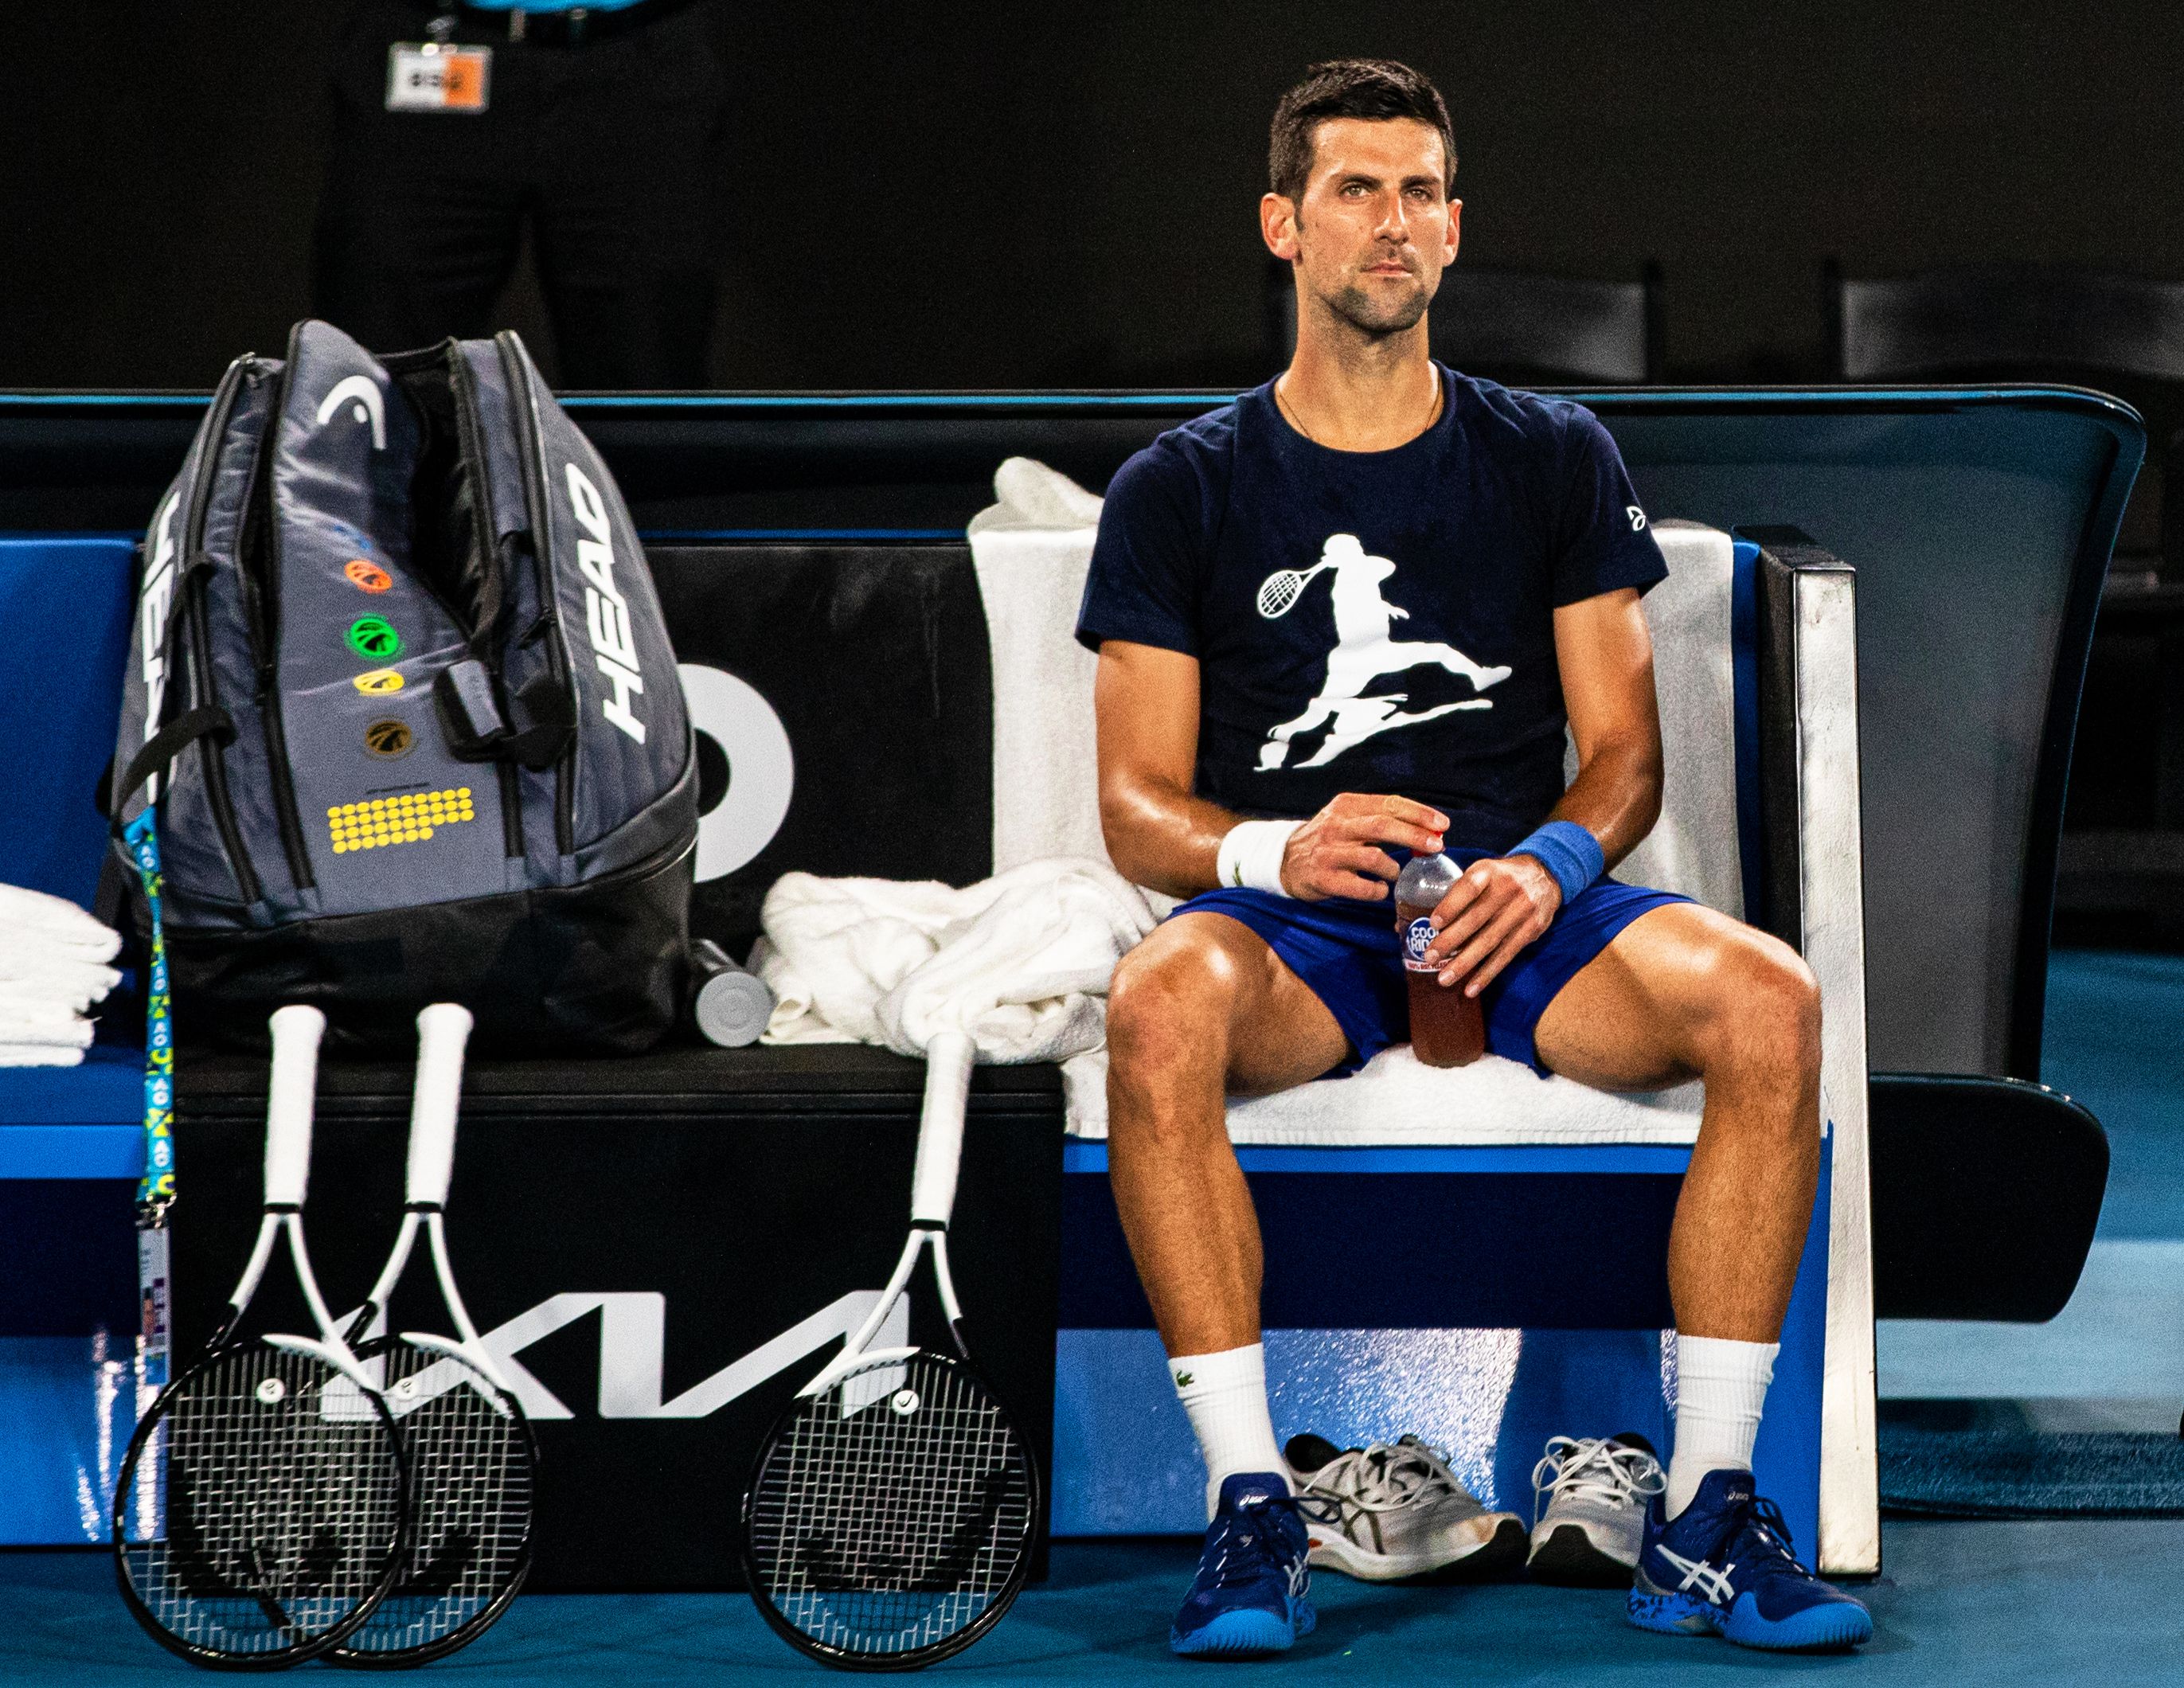 Novak Djokovic of Serbia rests during a practice session ahead of the Australian Open Grand Slam tennis tournament at Melbourne Park in Melbourne, Australia on January 14.